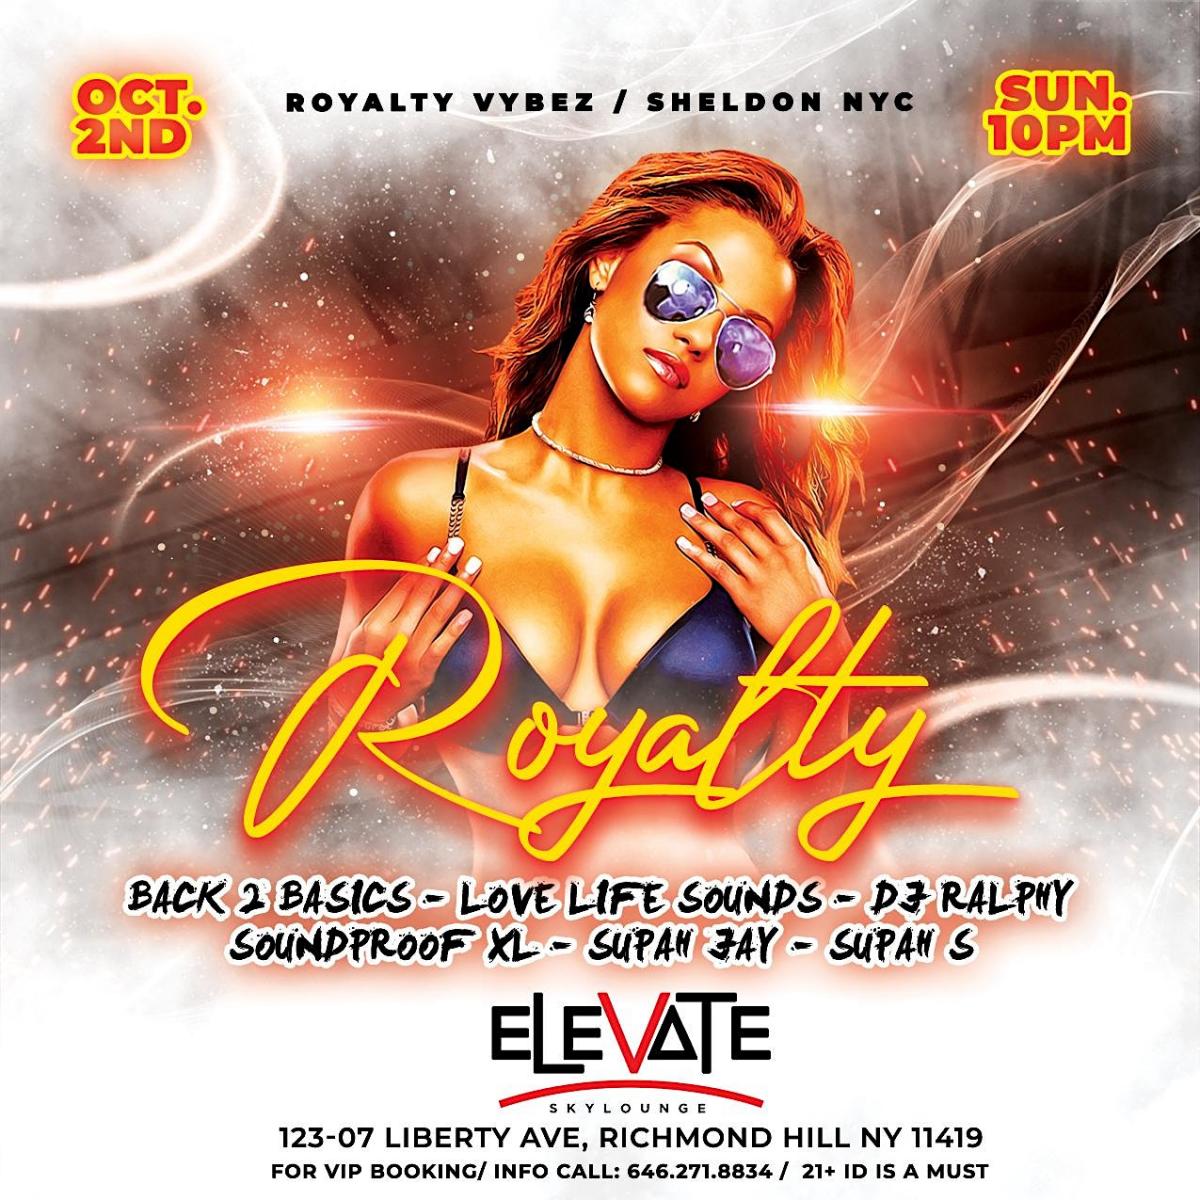 Royalty flyer or graphic.